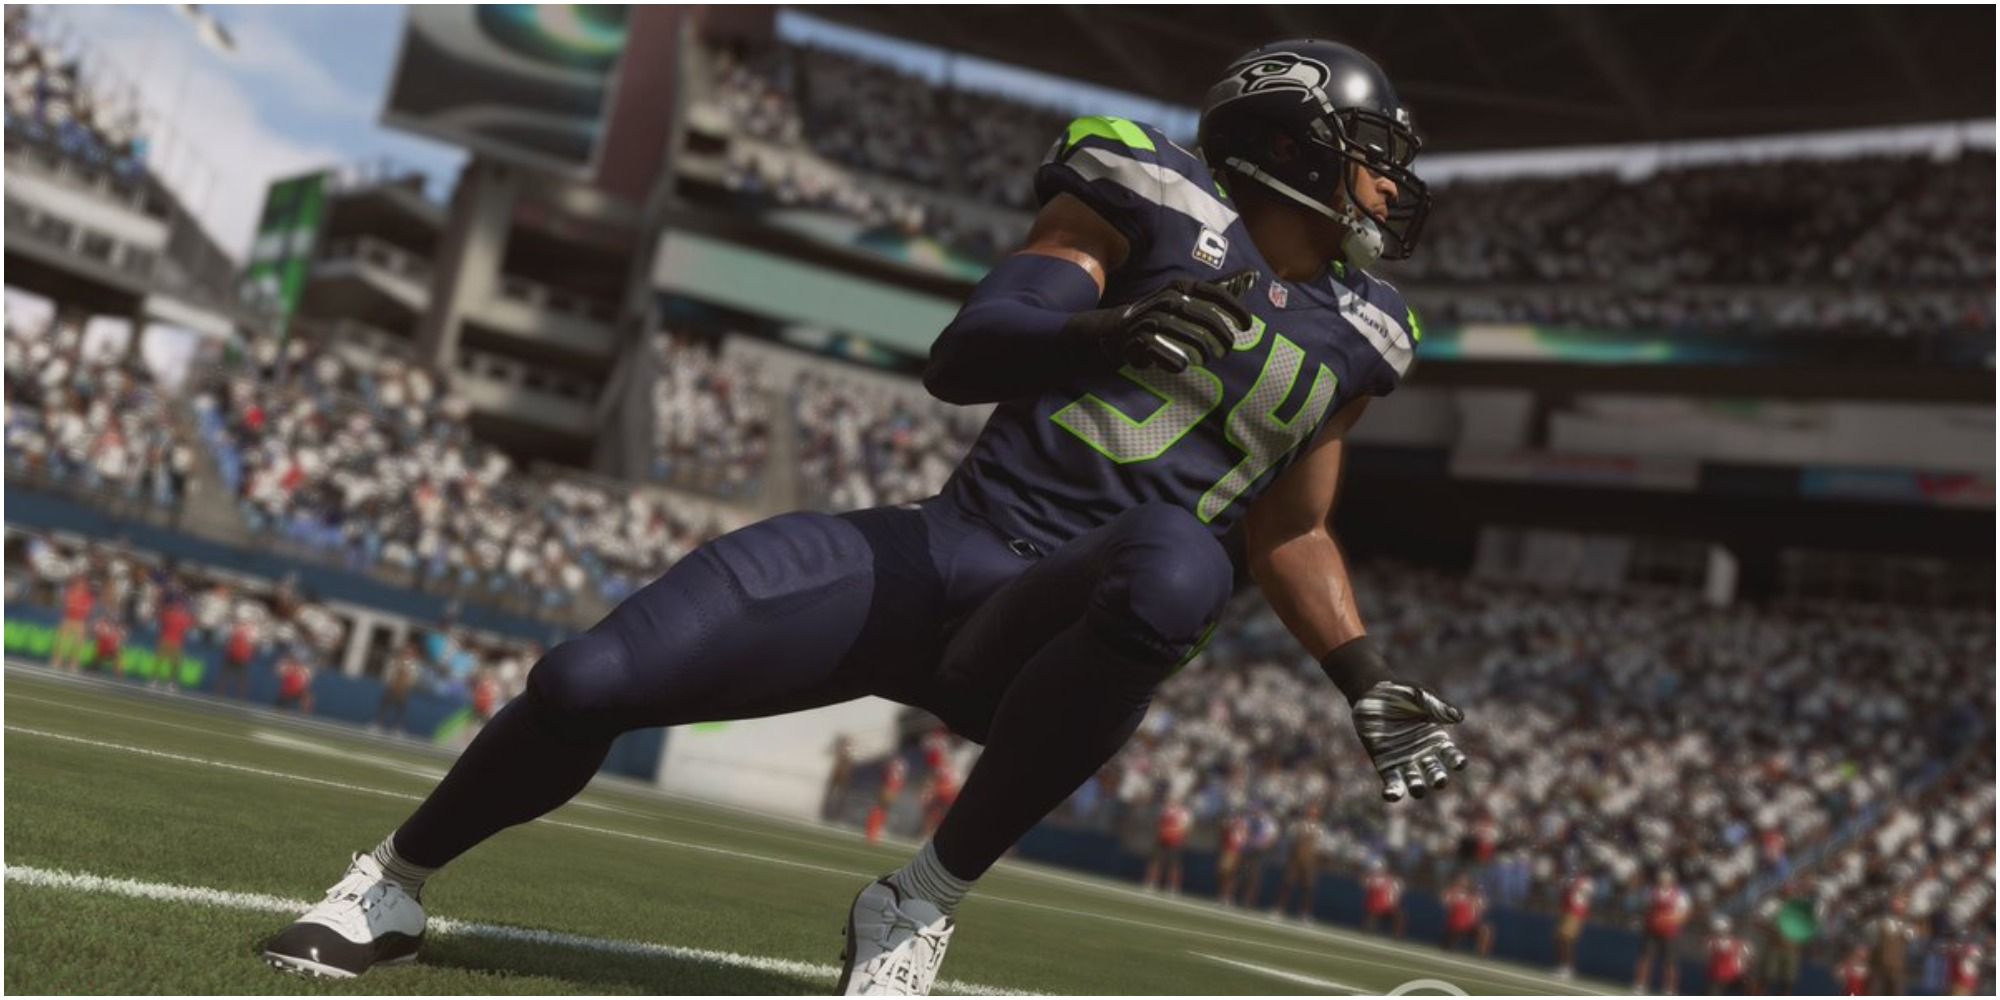 Madden NFL 22 Bobby Wagner Cutting Toward The Pass